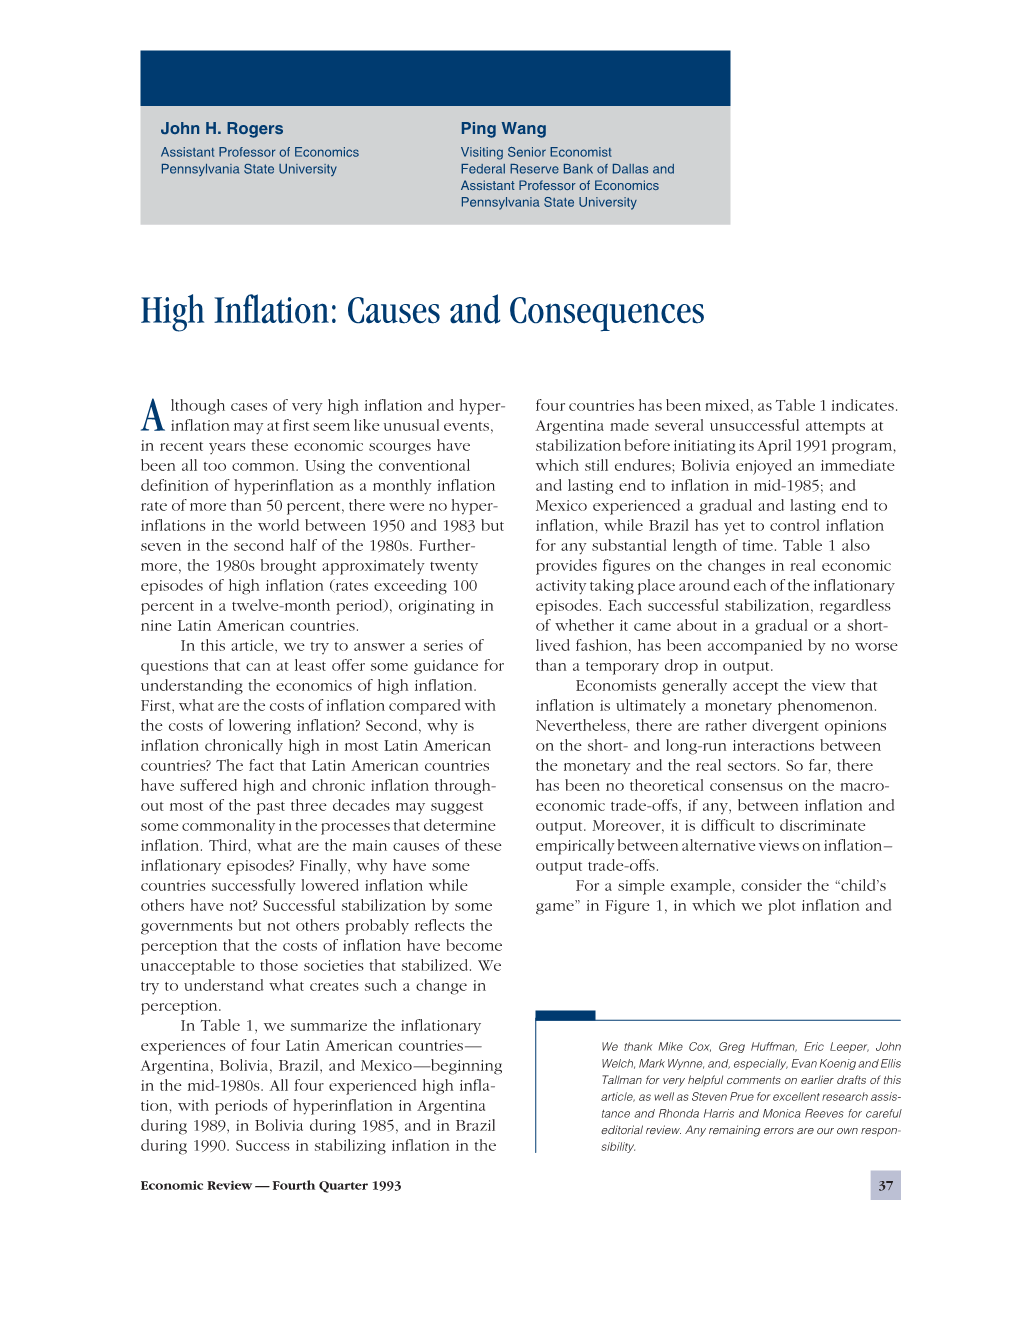 High Inflation: Causes and Consequences